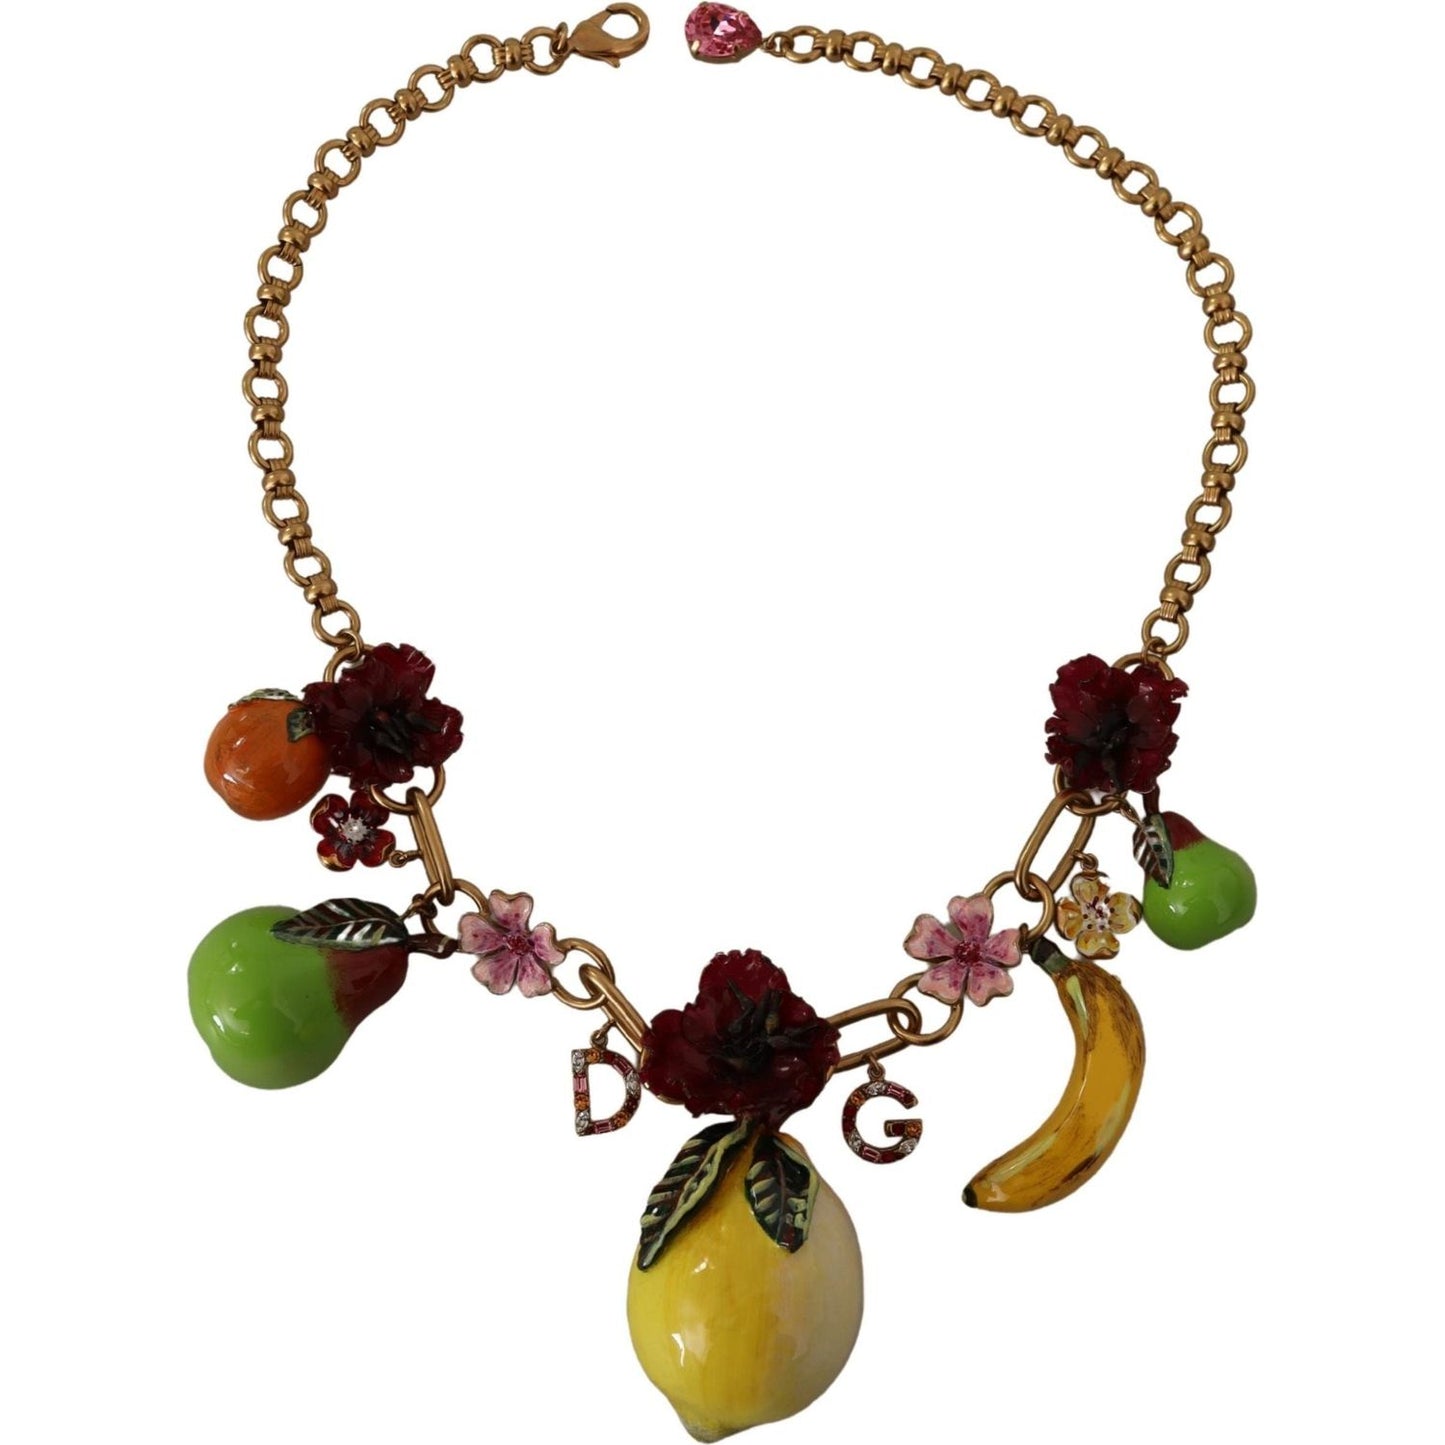 Dolce & Gabbana Chic Gold Statement Sicily Fruit Necklace gold-brass-sicily-fruits-roses-statement-necklace WOMAN NECKLACE IMG_1912-scaled-502e67b7-d07.jpg